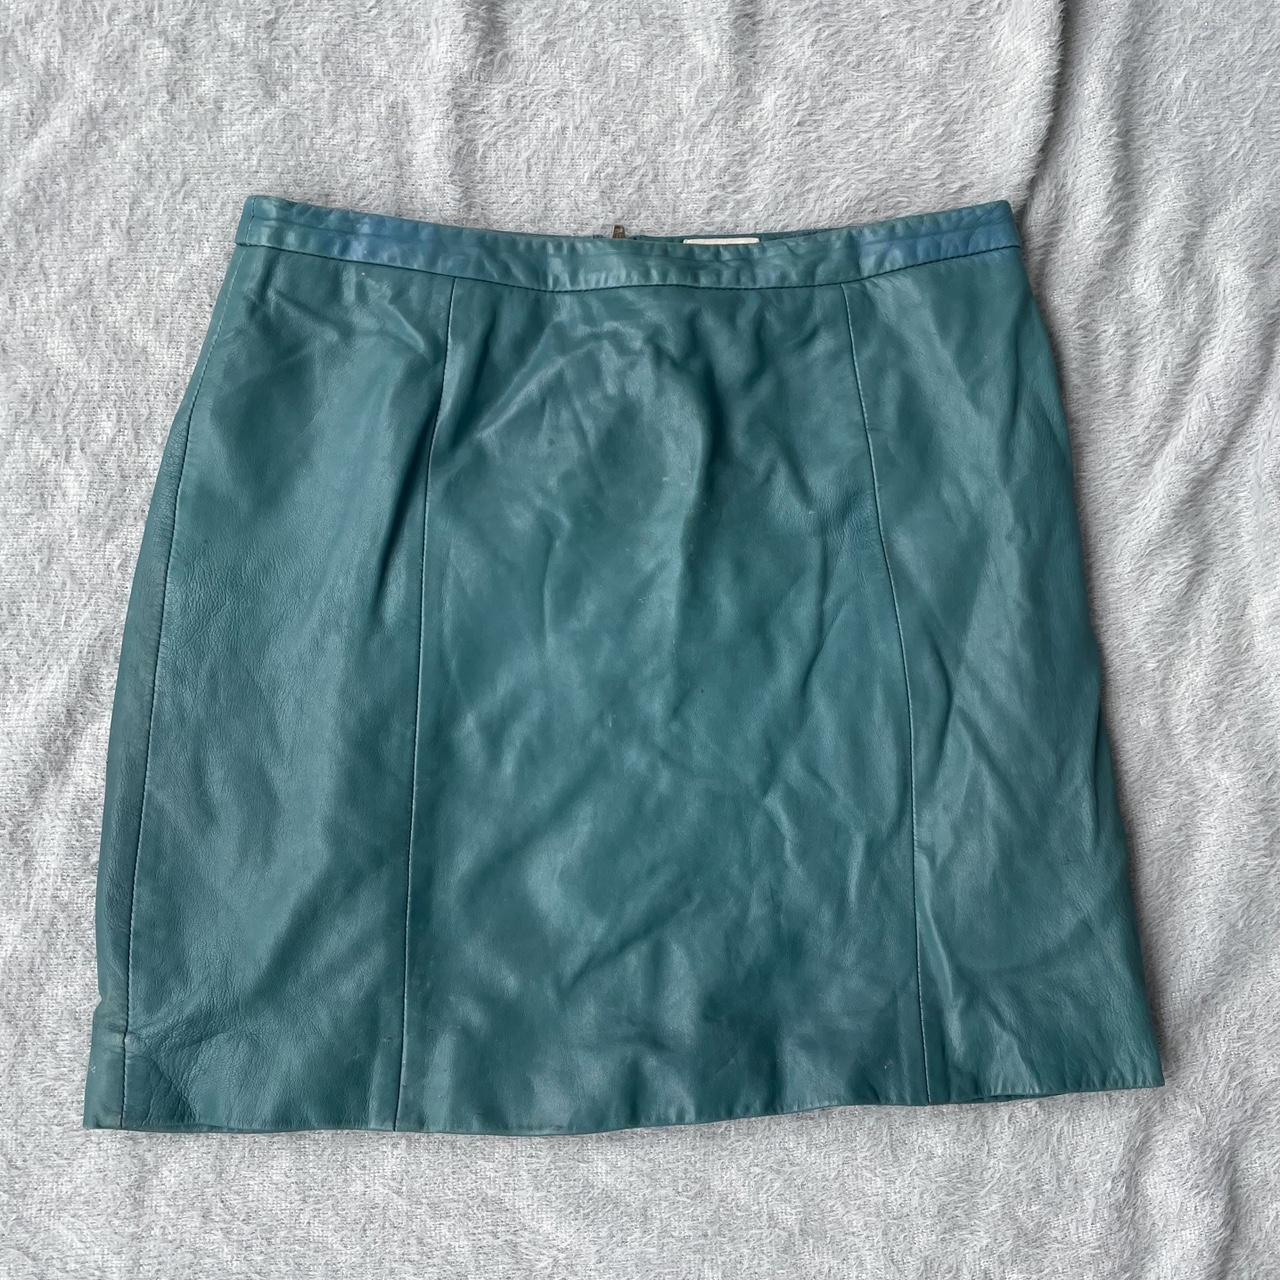 GORMAN LEATHER MINI SKIRT PURCHASED IN 2015 LEATHER... - Depop